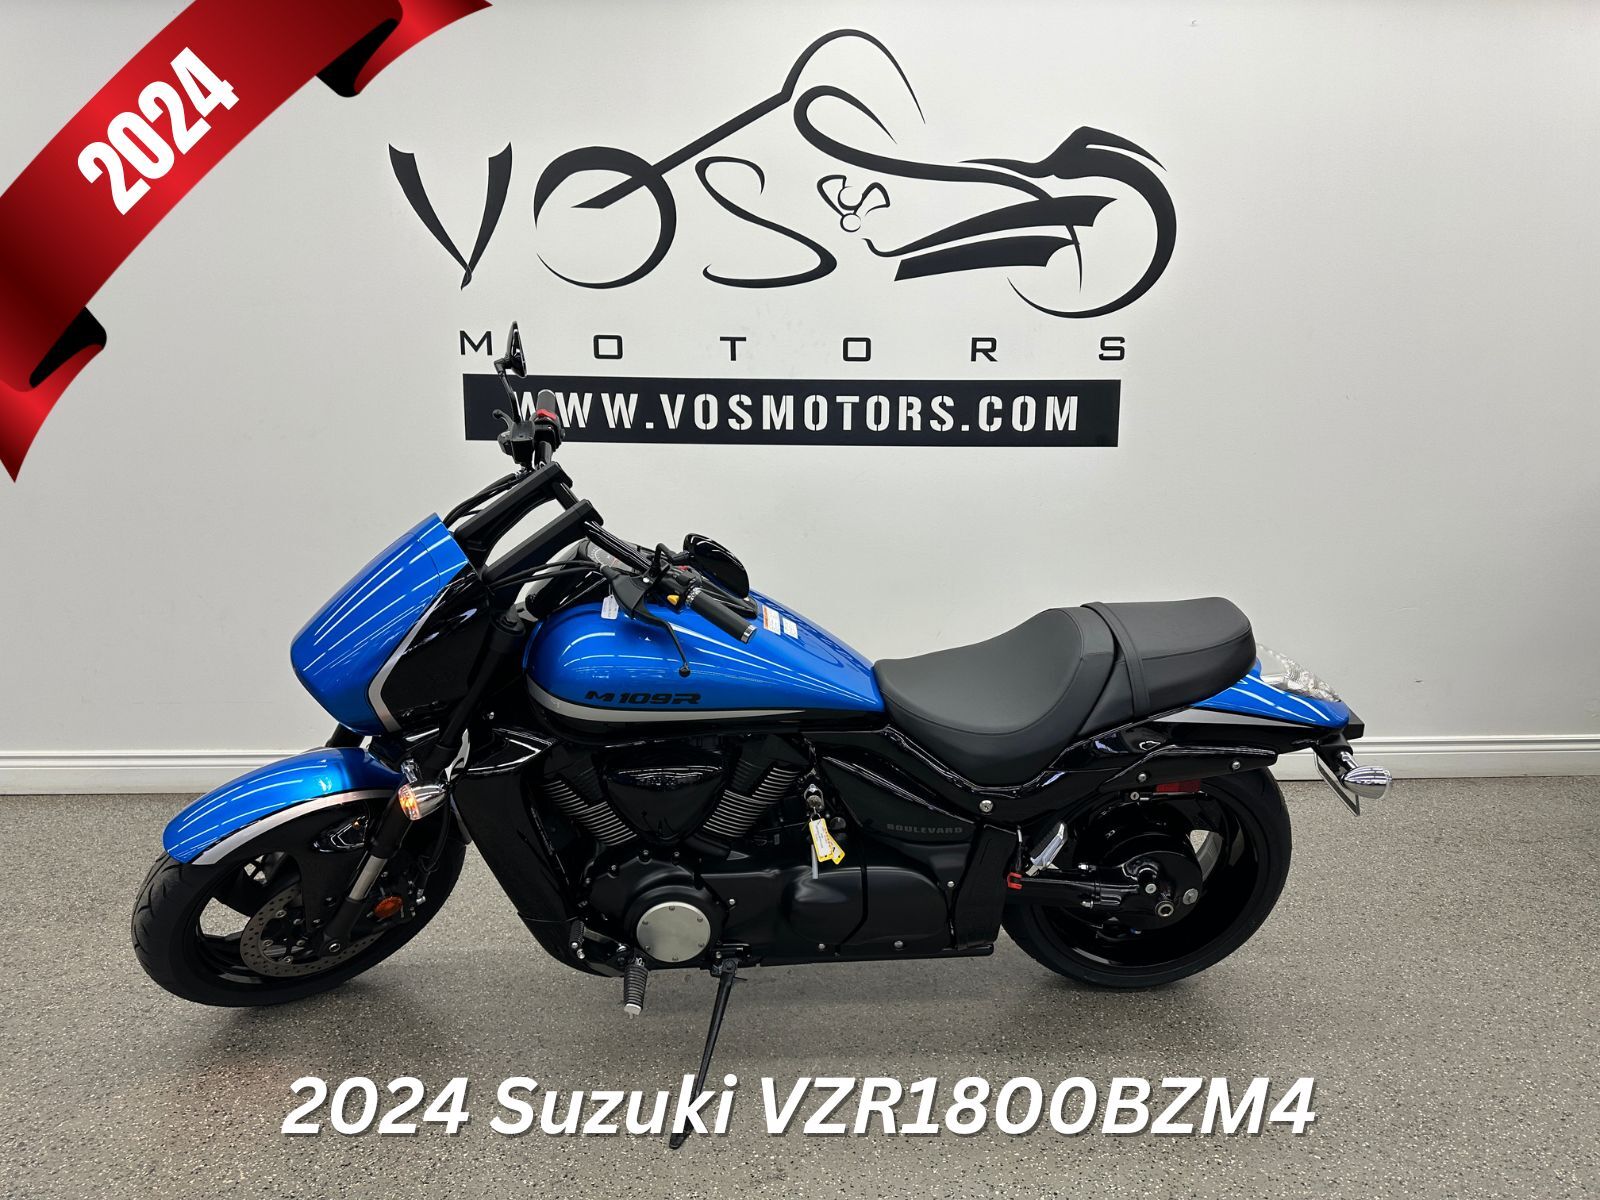 2024 Suzuki VZR1800BZM4 VZR1800BZM4 - V5974NP - -No Payments for 1 Year**